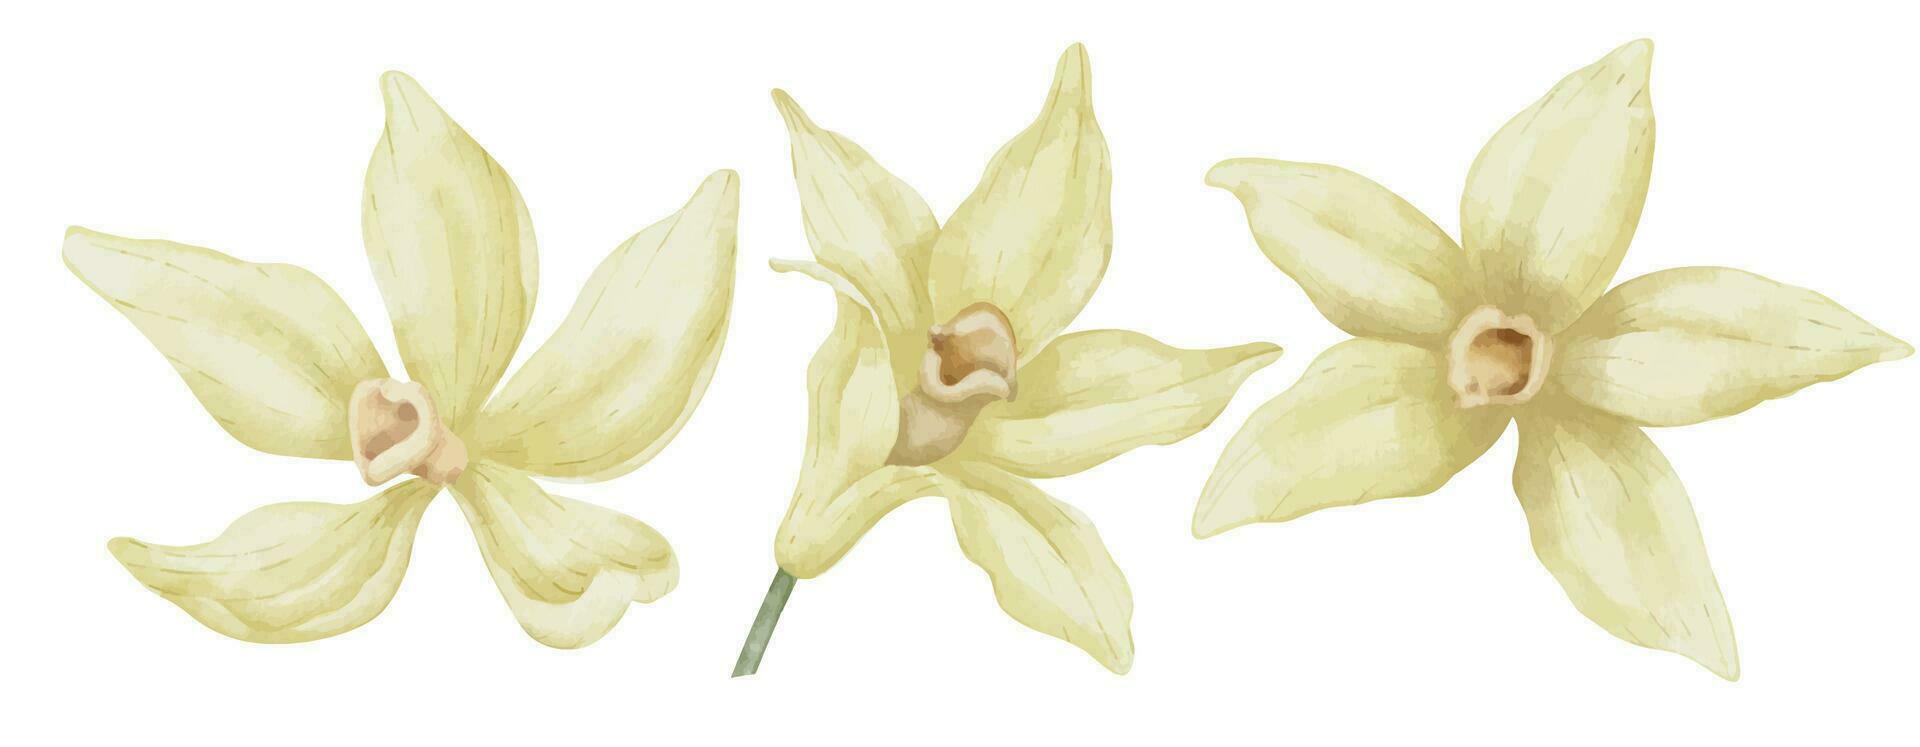 Vanilla Flowers set. Hand drawn watercolor illustration of yellow orchid plants on white isolated background. Drawing of herbal ingredient for cooking or aroma flavor. Bundle of blooming plants vector